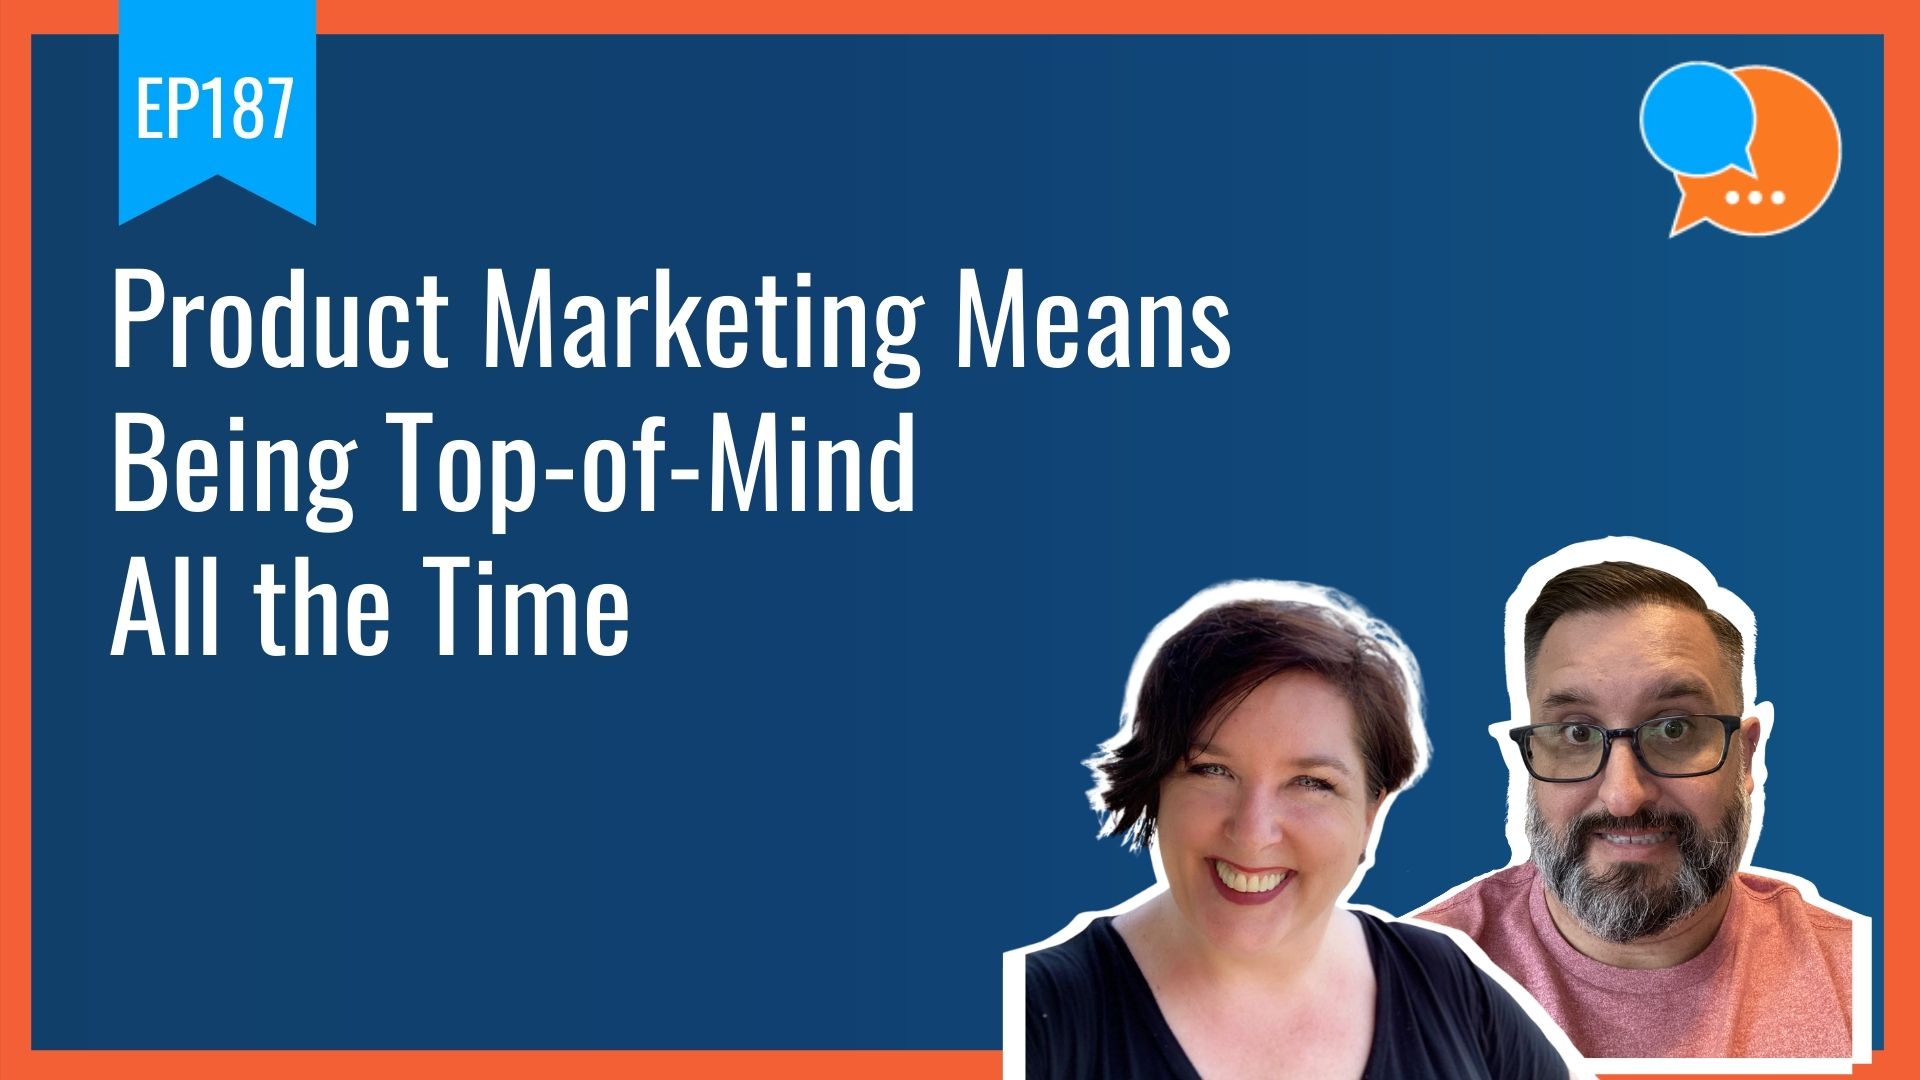 EP187 – Product Marketing Means Being Top-of-Mind All the Time